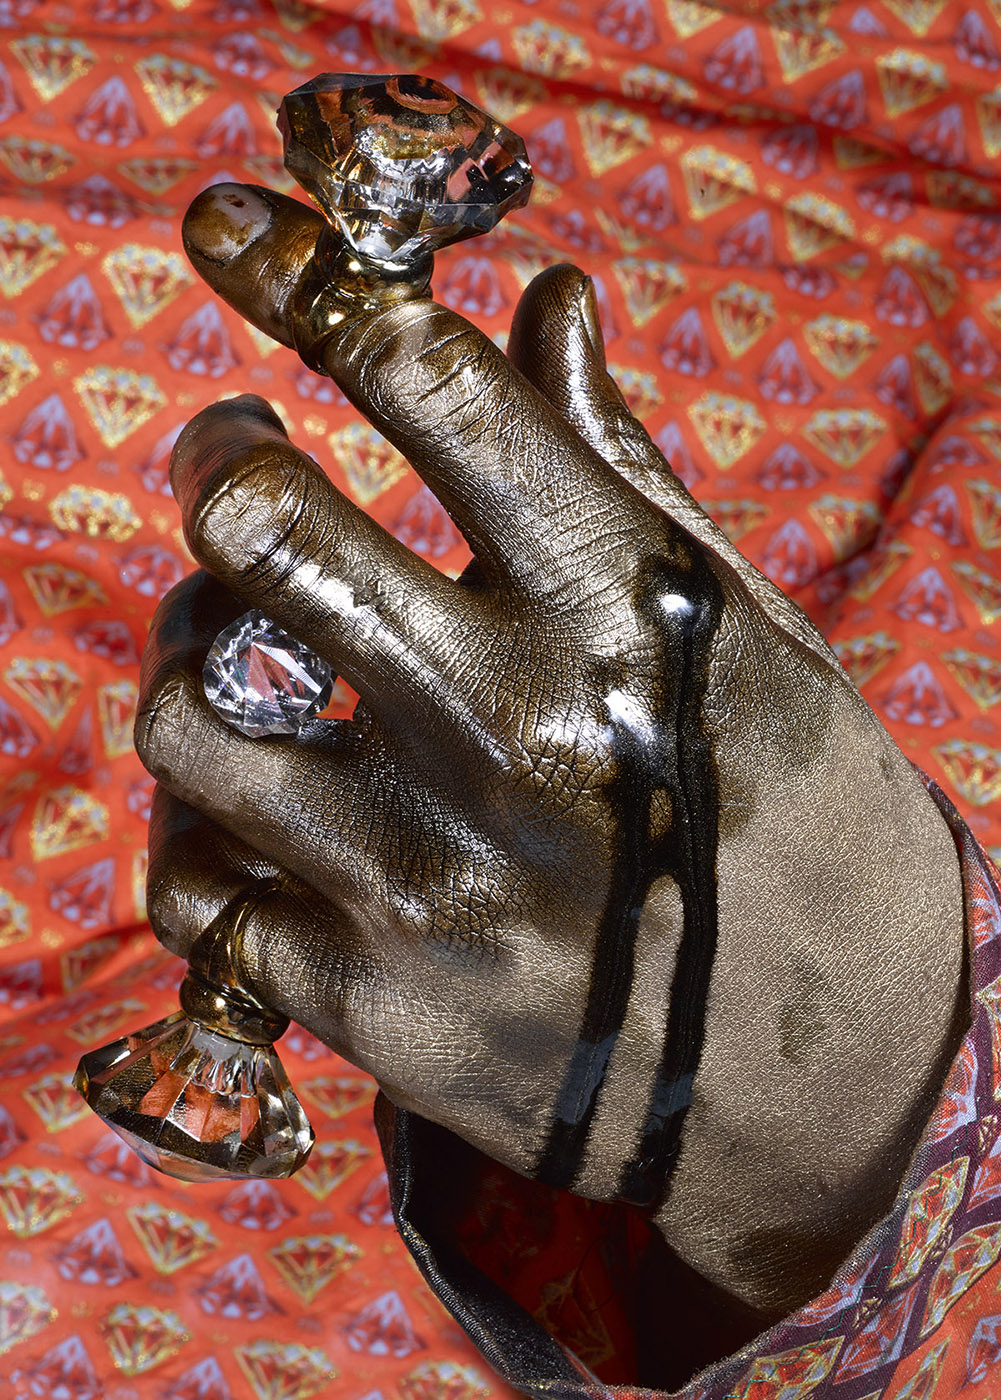 Closeup of a hand covered in gold paint and black oil, wearing two large diamond rings and holding an additional gemstone between the middle fingers.